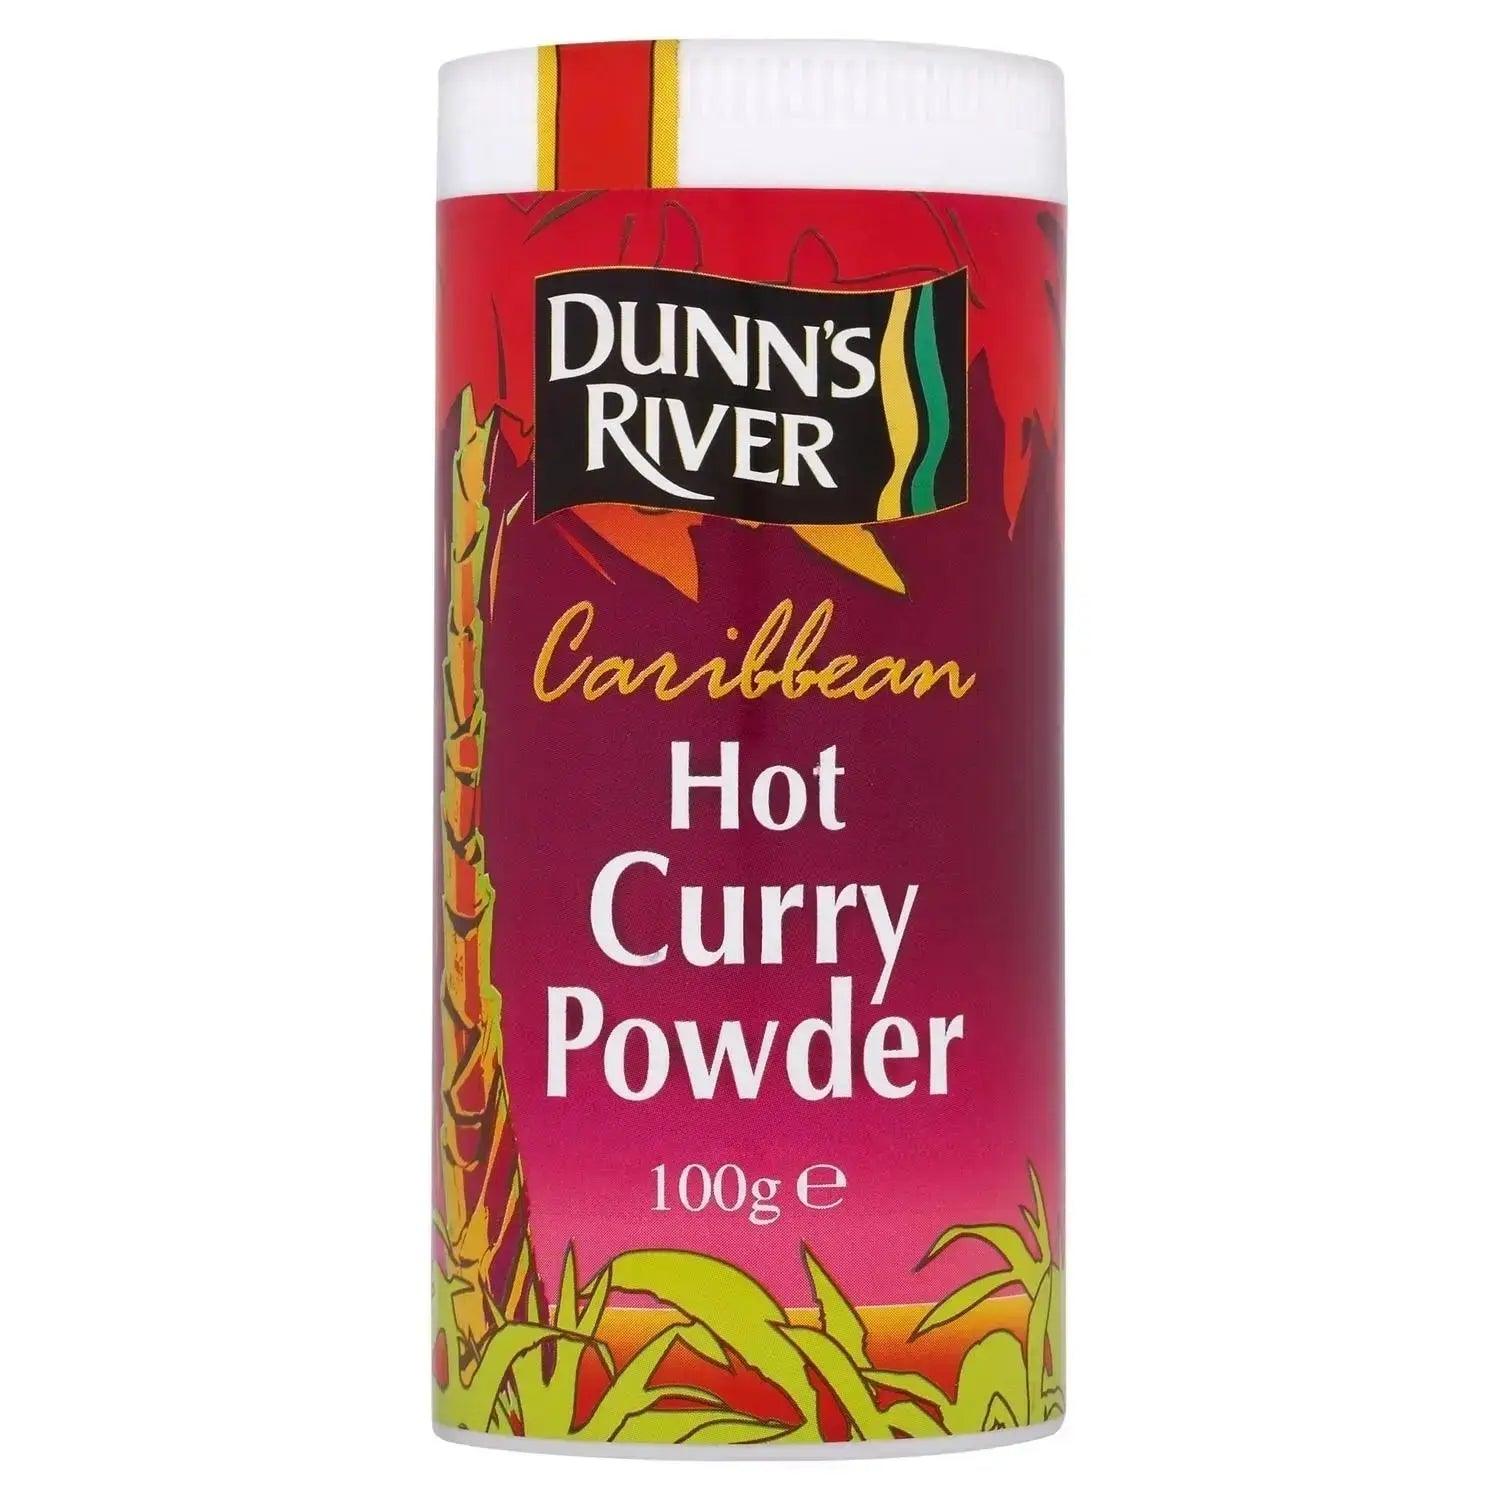 Dunns’ River Hot Curry Powder 100g (12 in Case) - Honesty Sales U.K